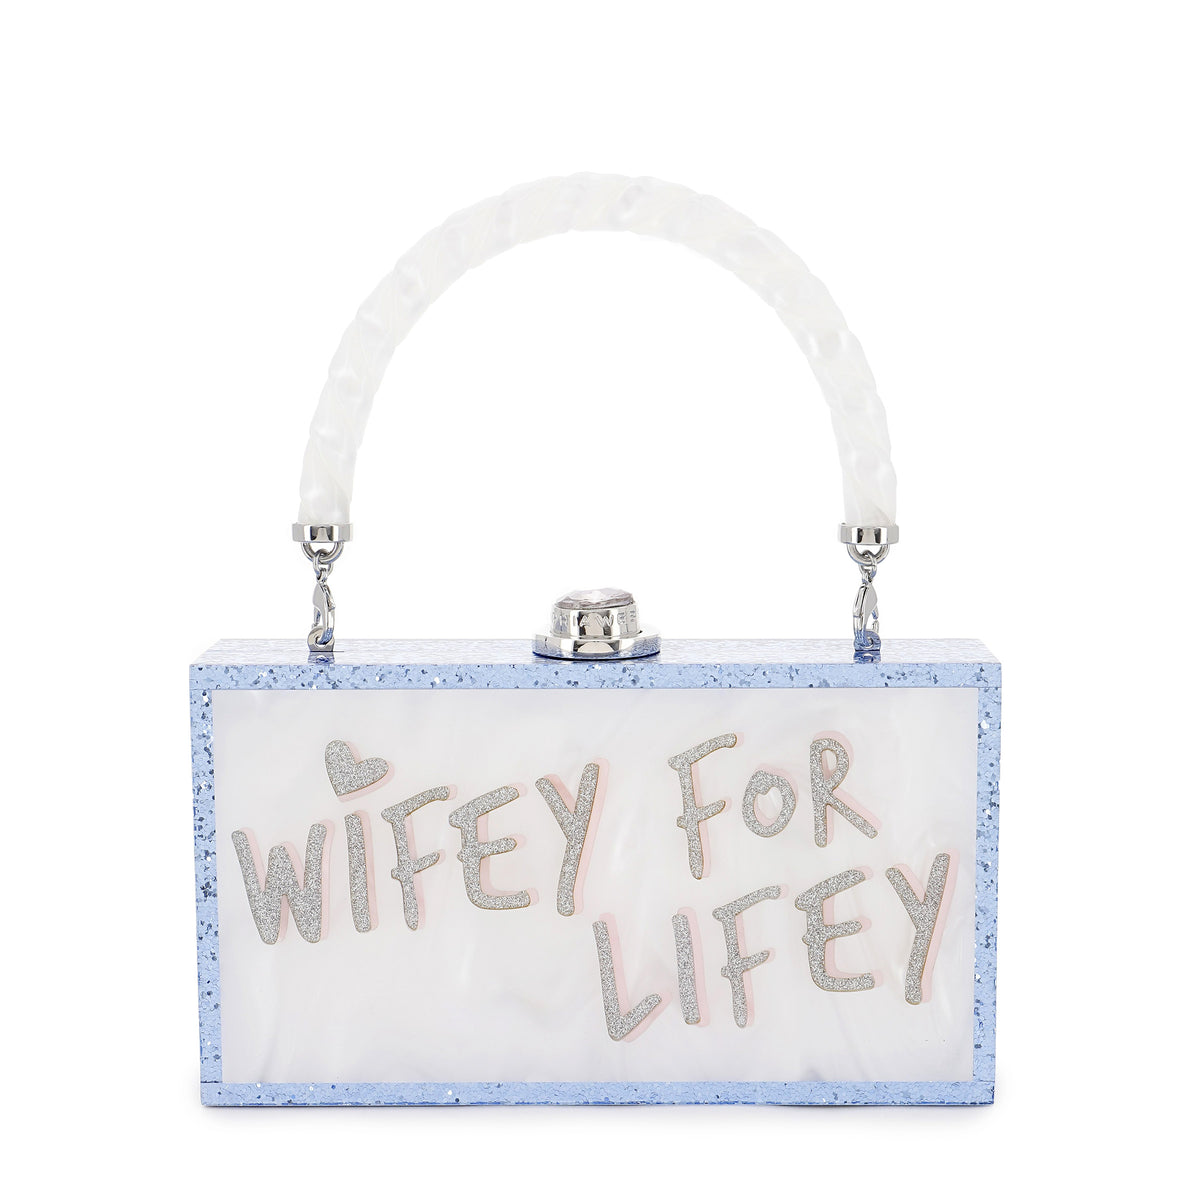 Wifey for Lifey Clutch in Pearl Blue with Handle